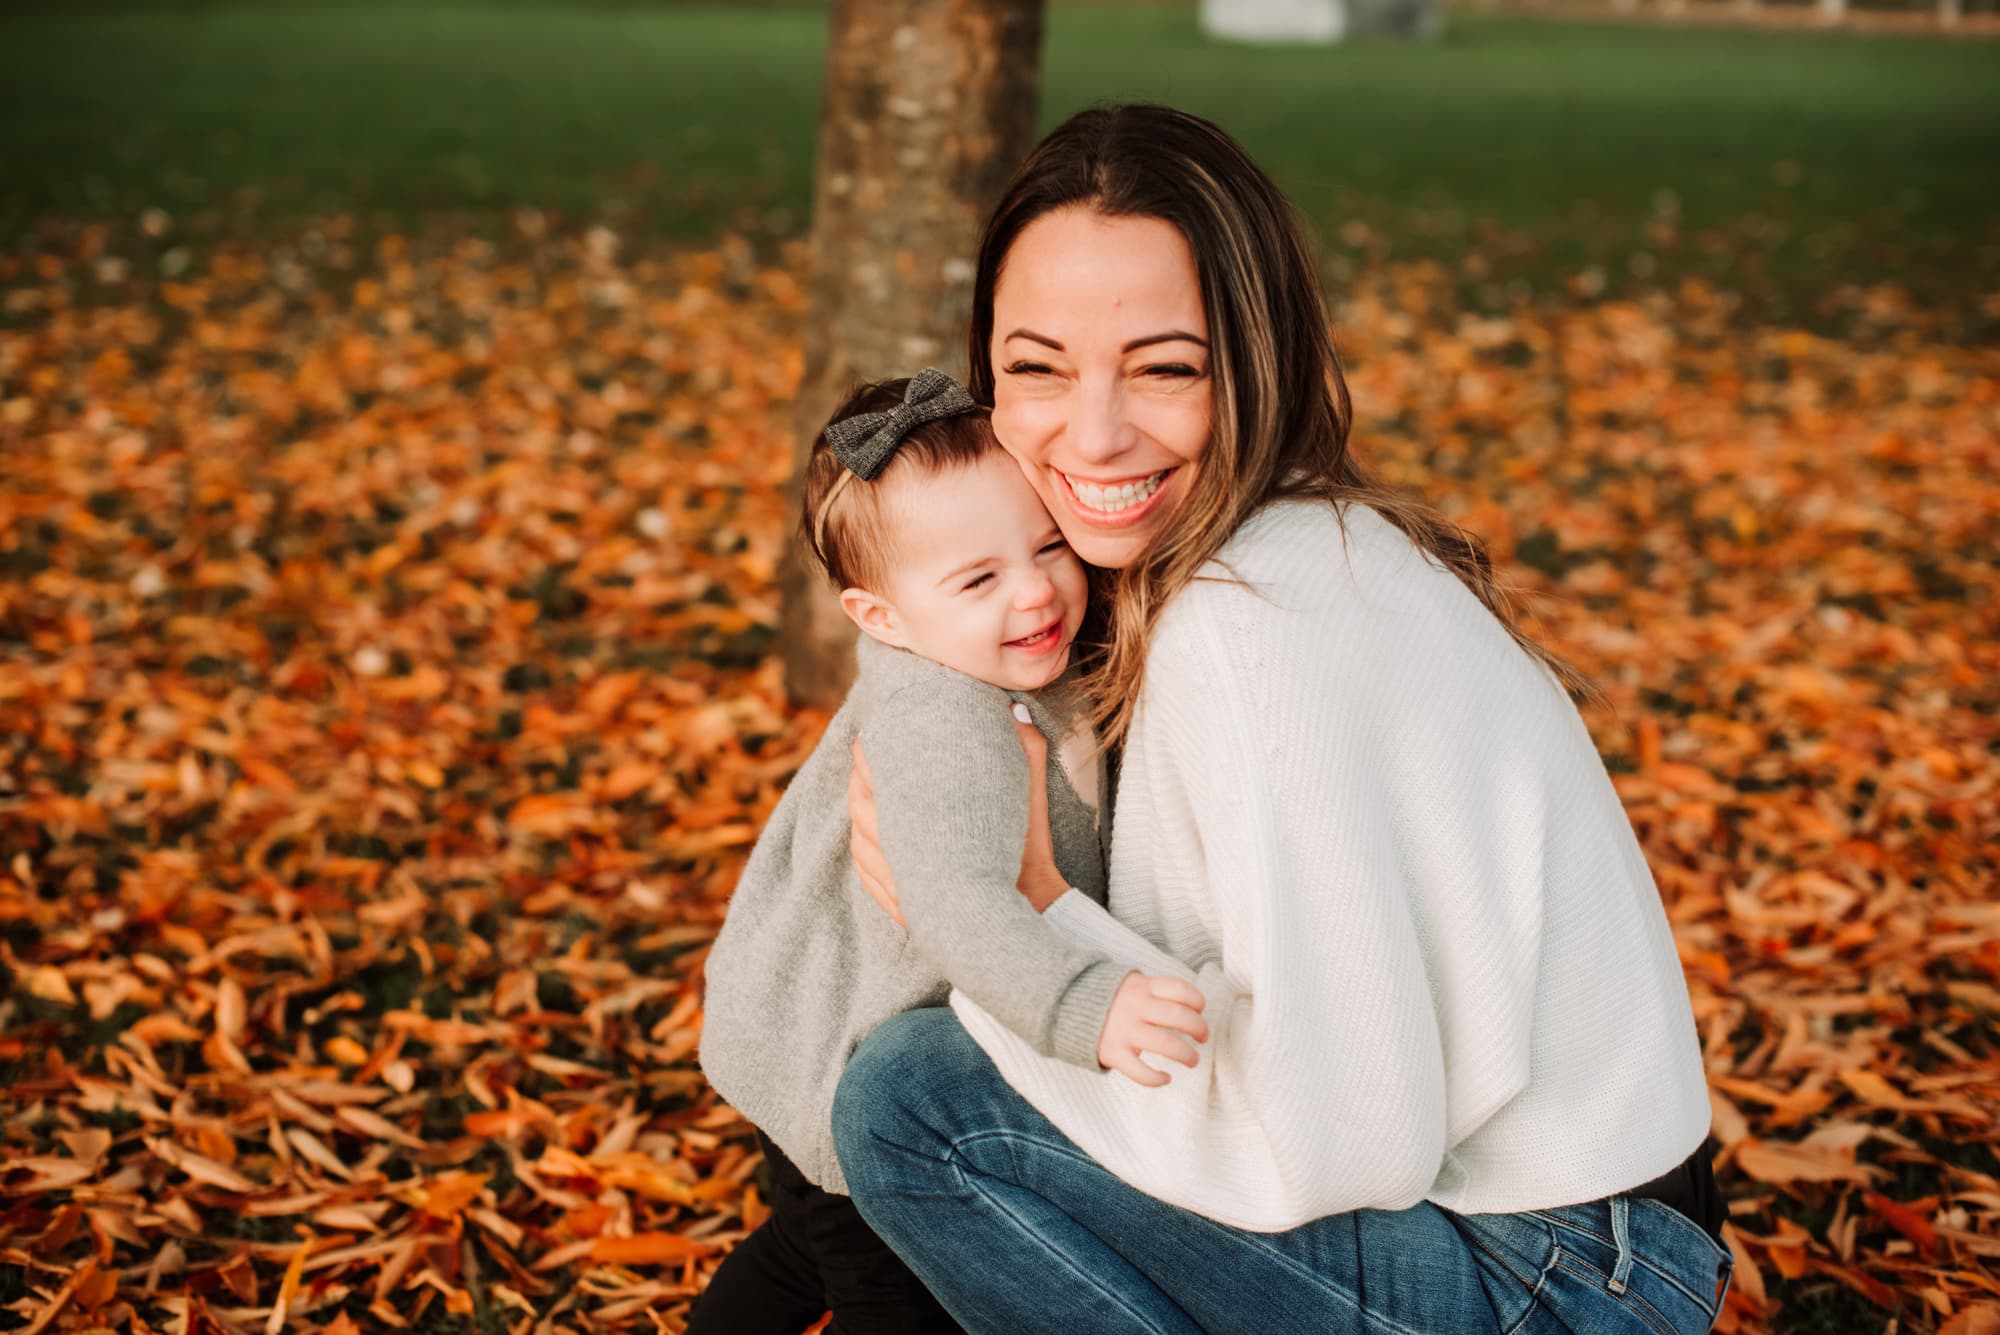 Vancouver Family Photographer captures mom and girl hugging in fall leaves in Vancouver.